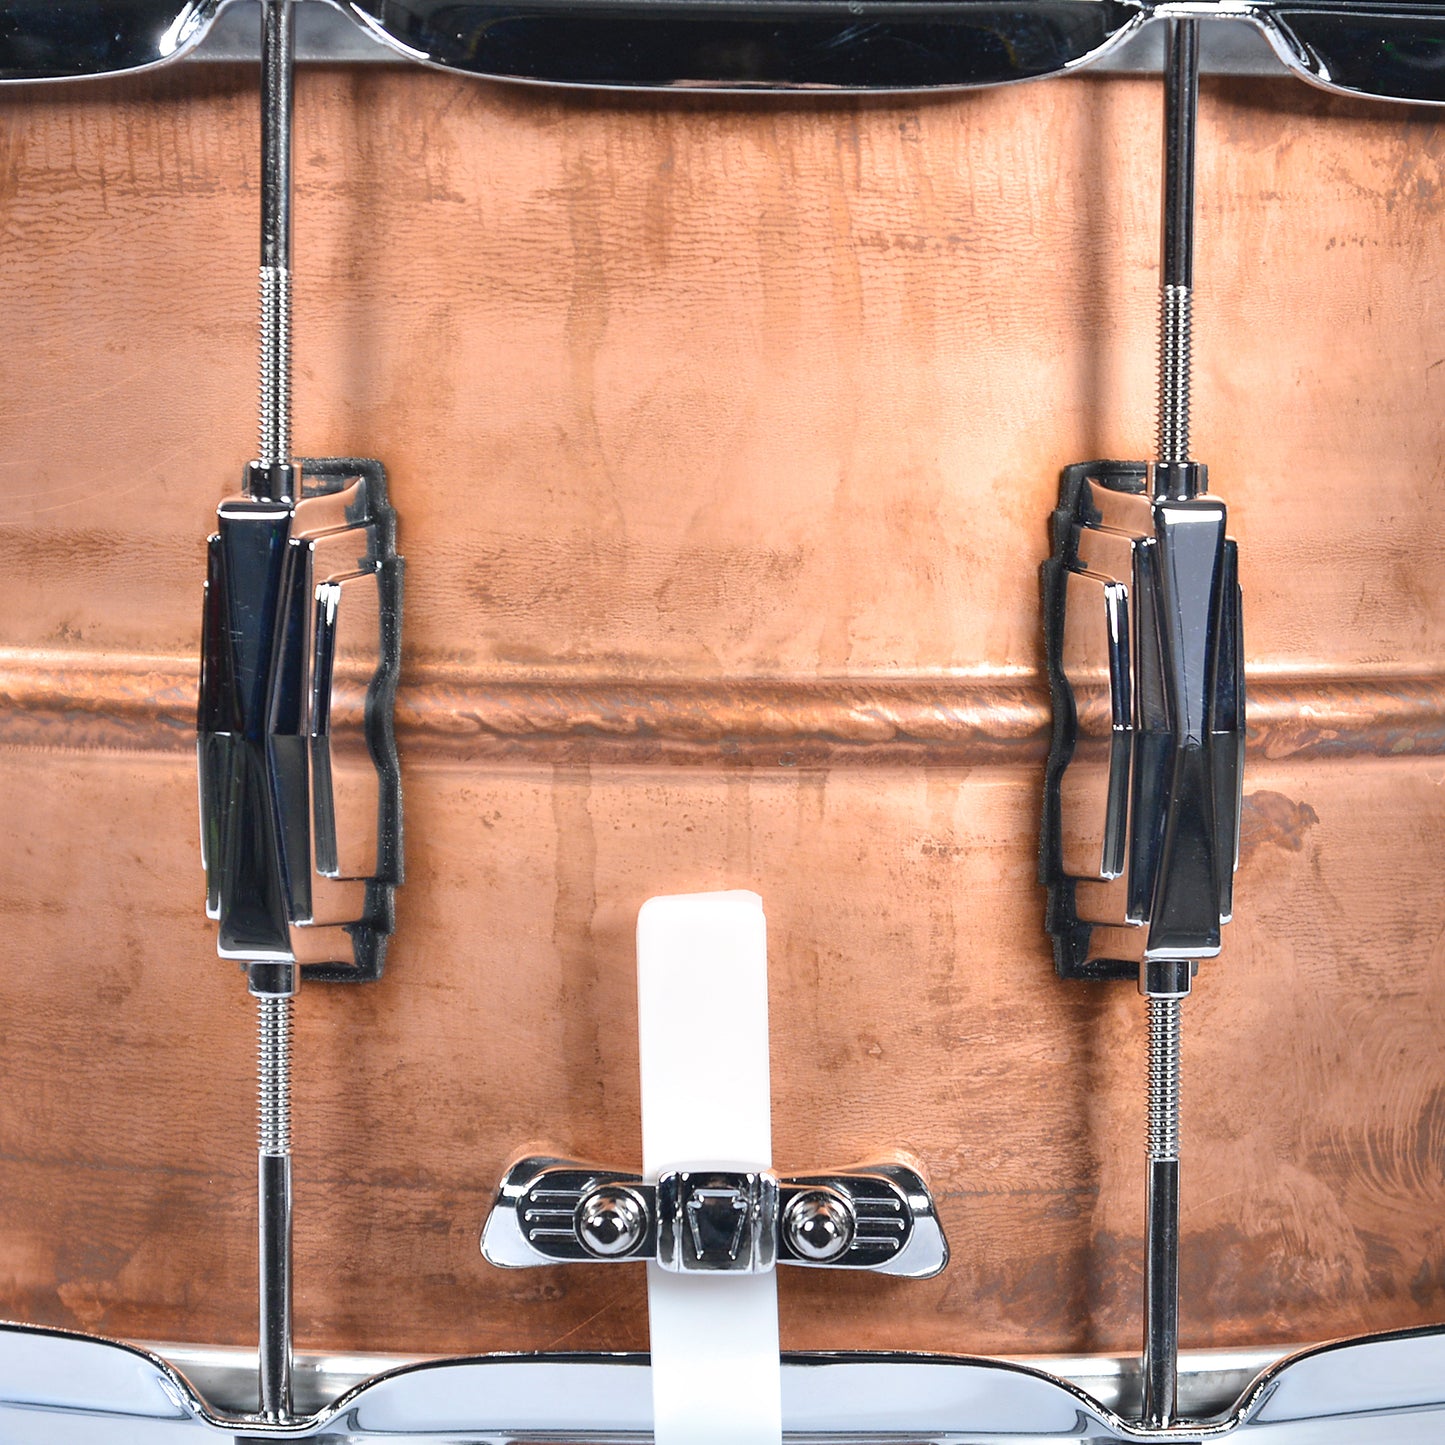 Ludwig 8x14 Raw Copper Phonic Snare Drum